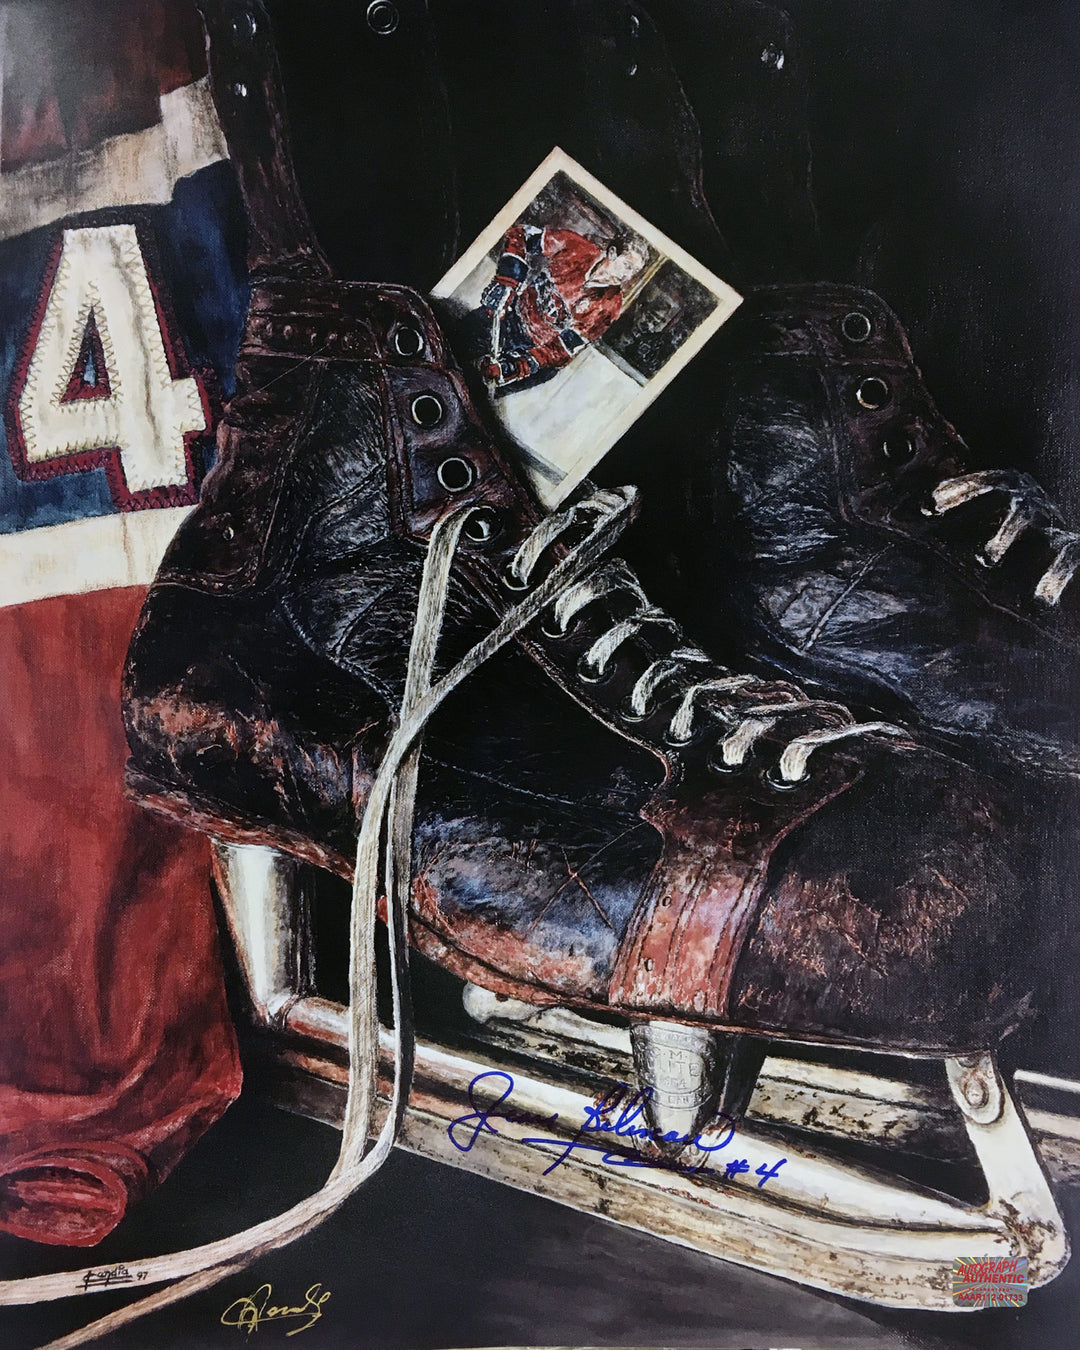 Jean Beliveau Signed 16X20 Photo - Montreal Canadiens, Montreal Canadiens, NHL, Hockey, Autographed, Signed, AAHPH31577